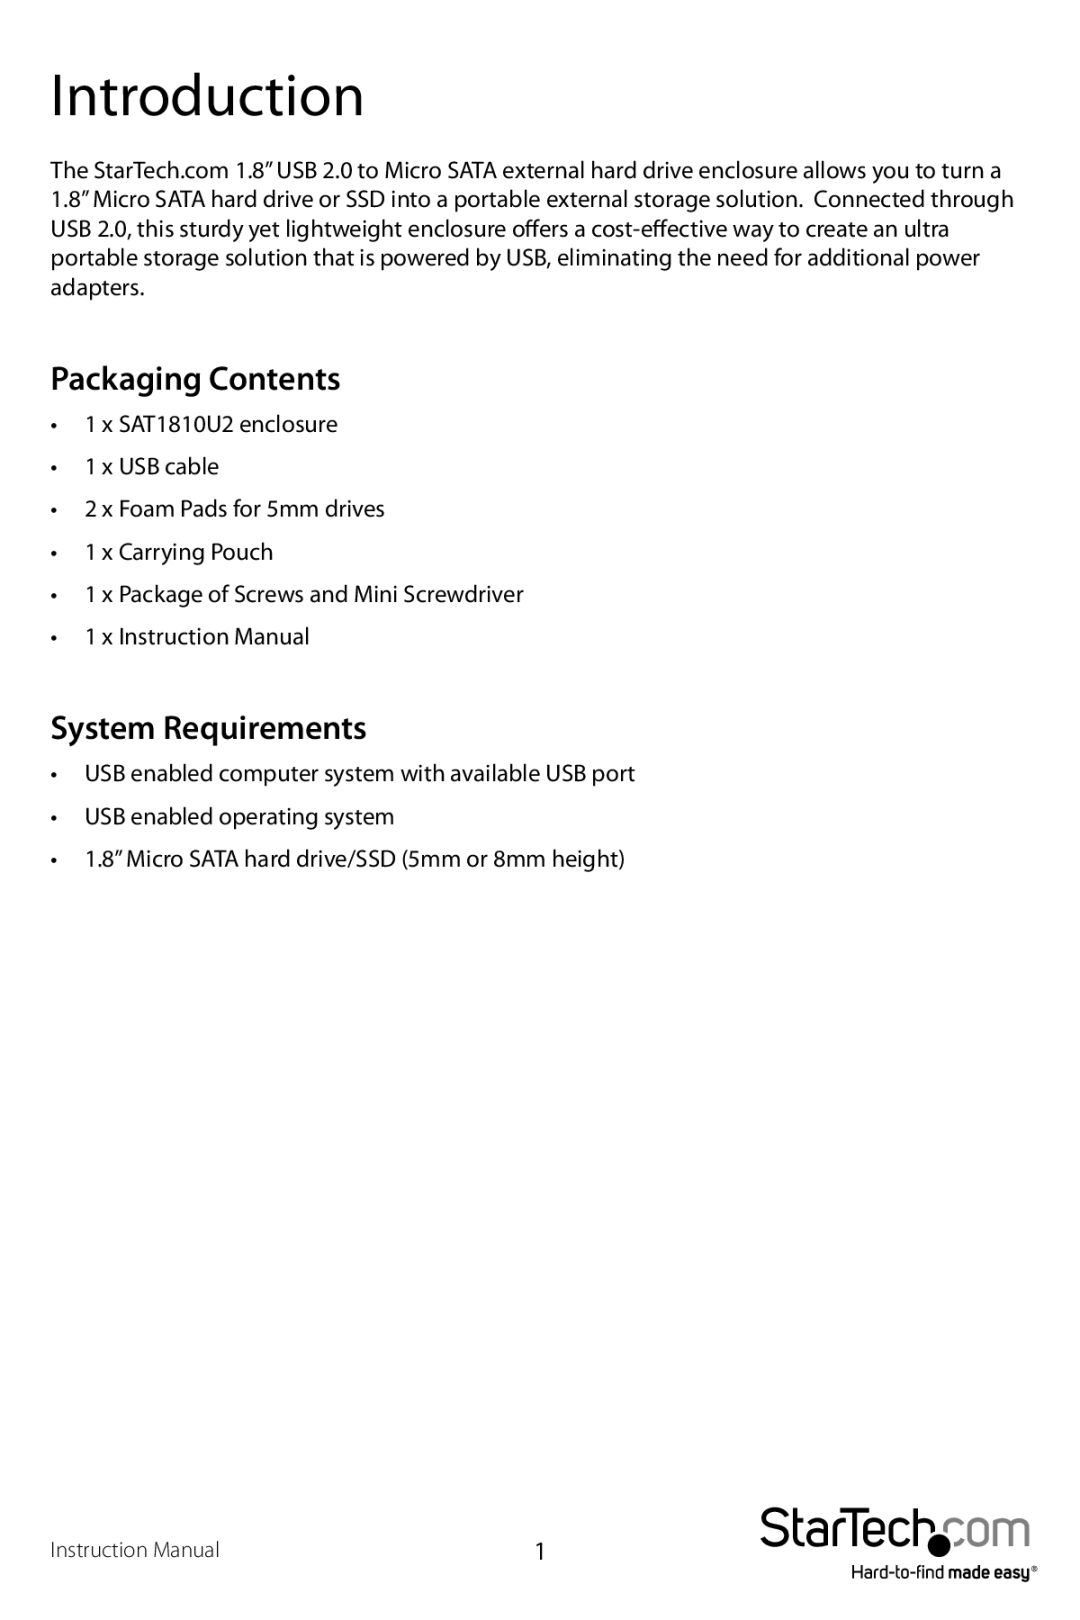 StarTech.com 1.8in usb to micro sata hard drive enclosure manual Introduction, Packaging Contents, System Requirements 